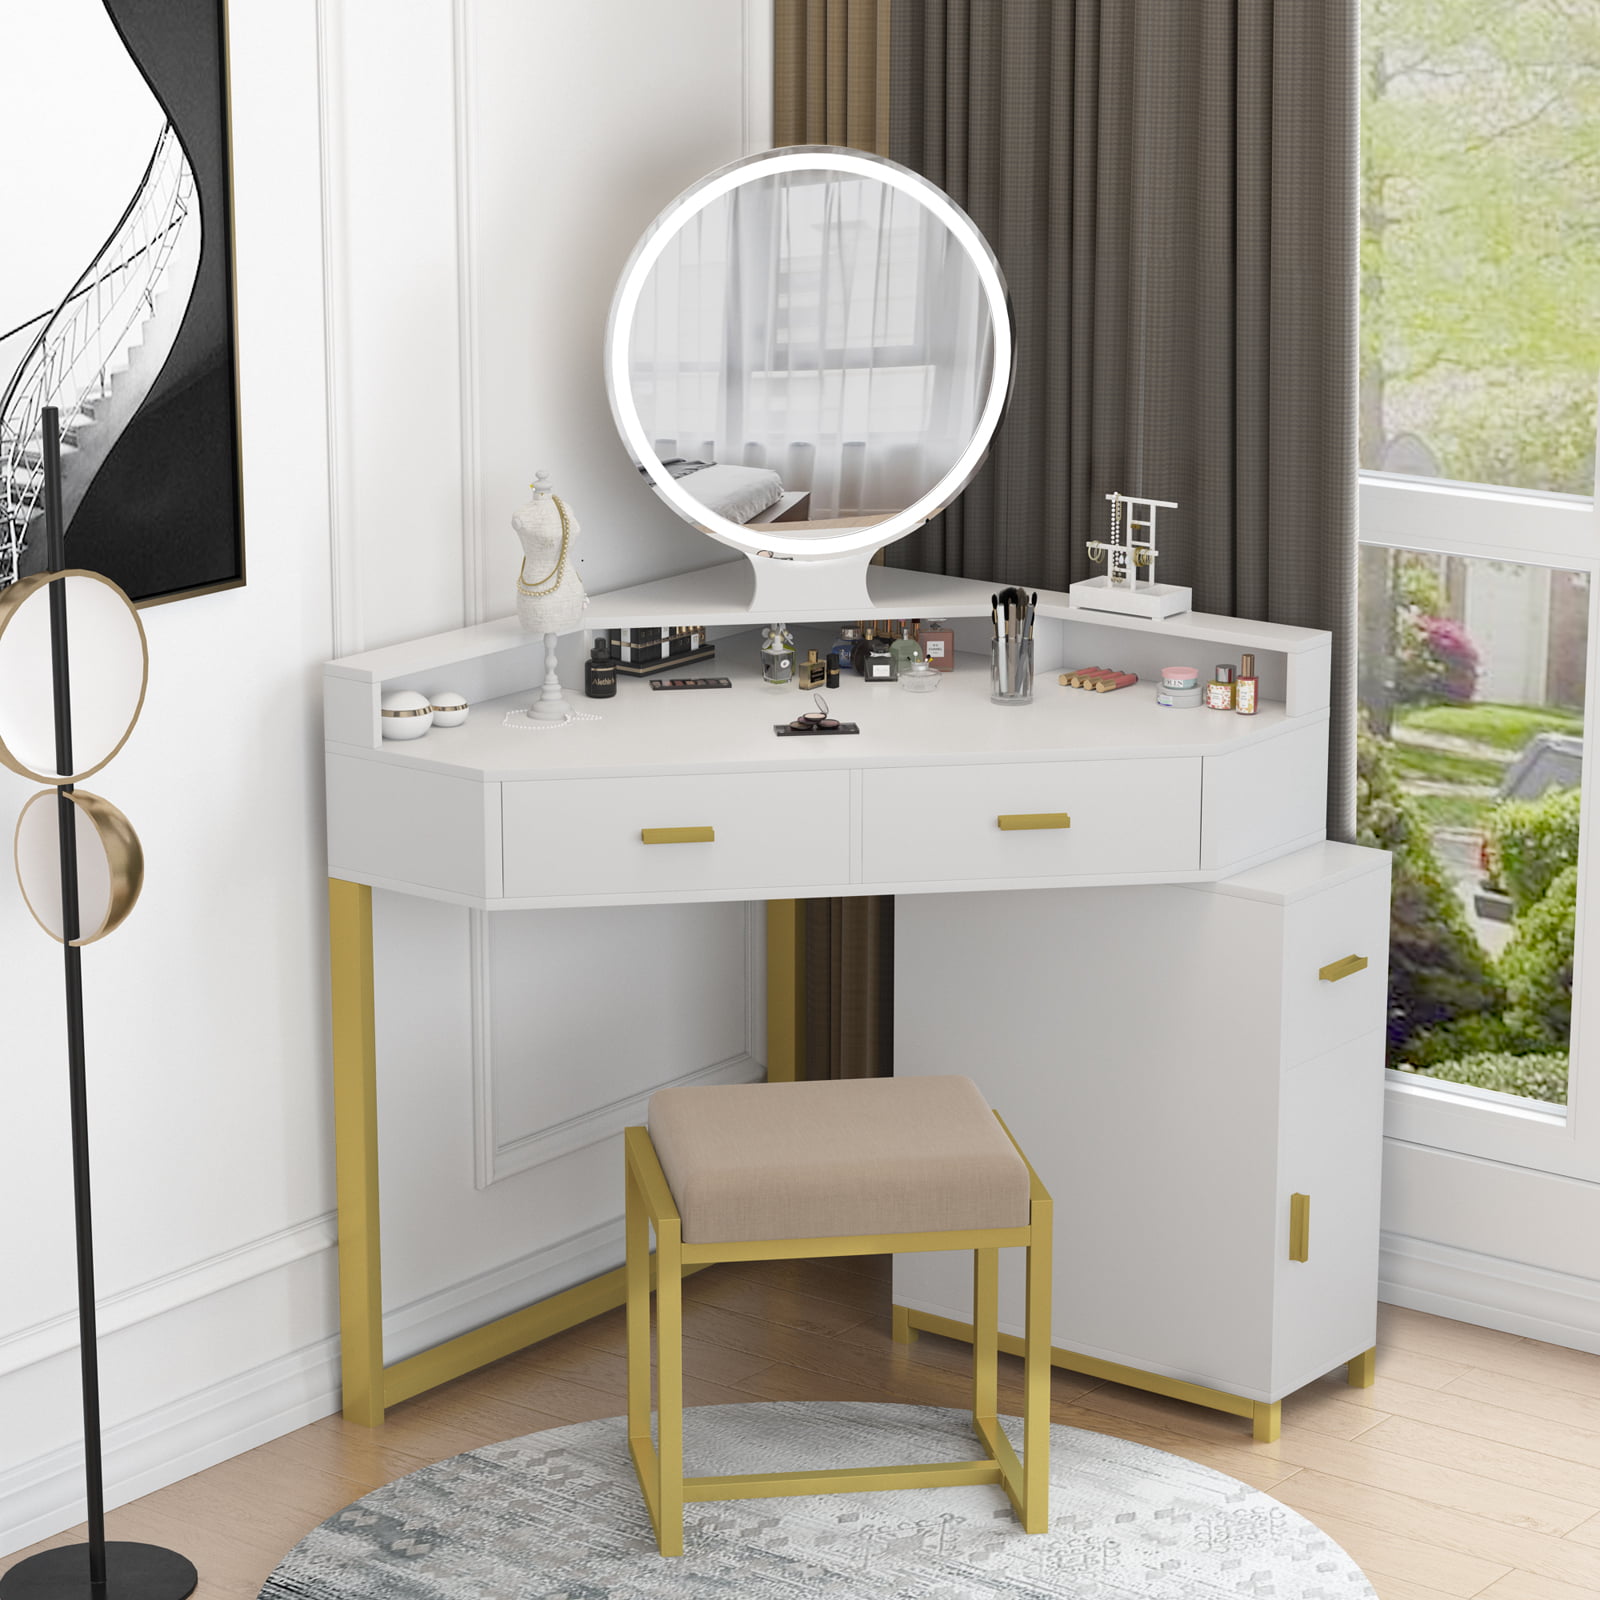 AOUSTHOP Dressing Table Set Vanity Table Set Makeup Desk with 2 Drawers and Flip Up Mirror for Girls and Women